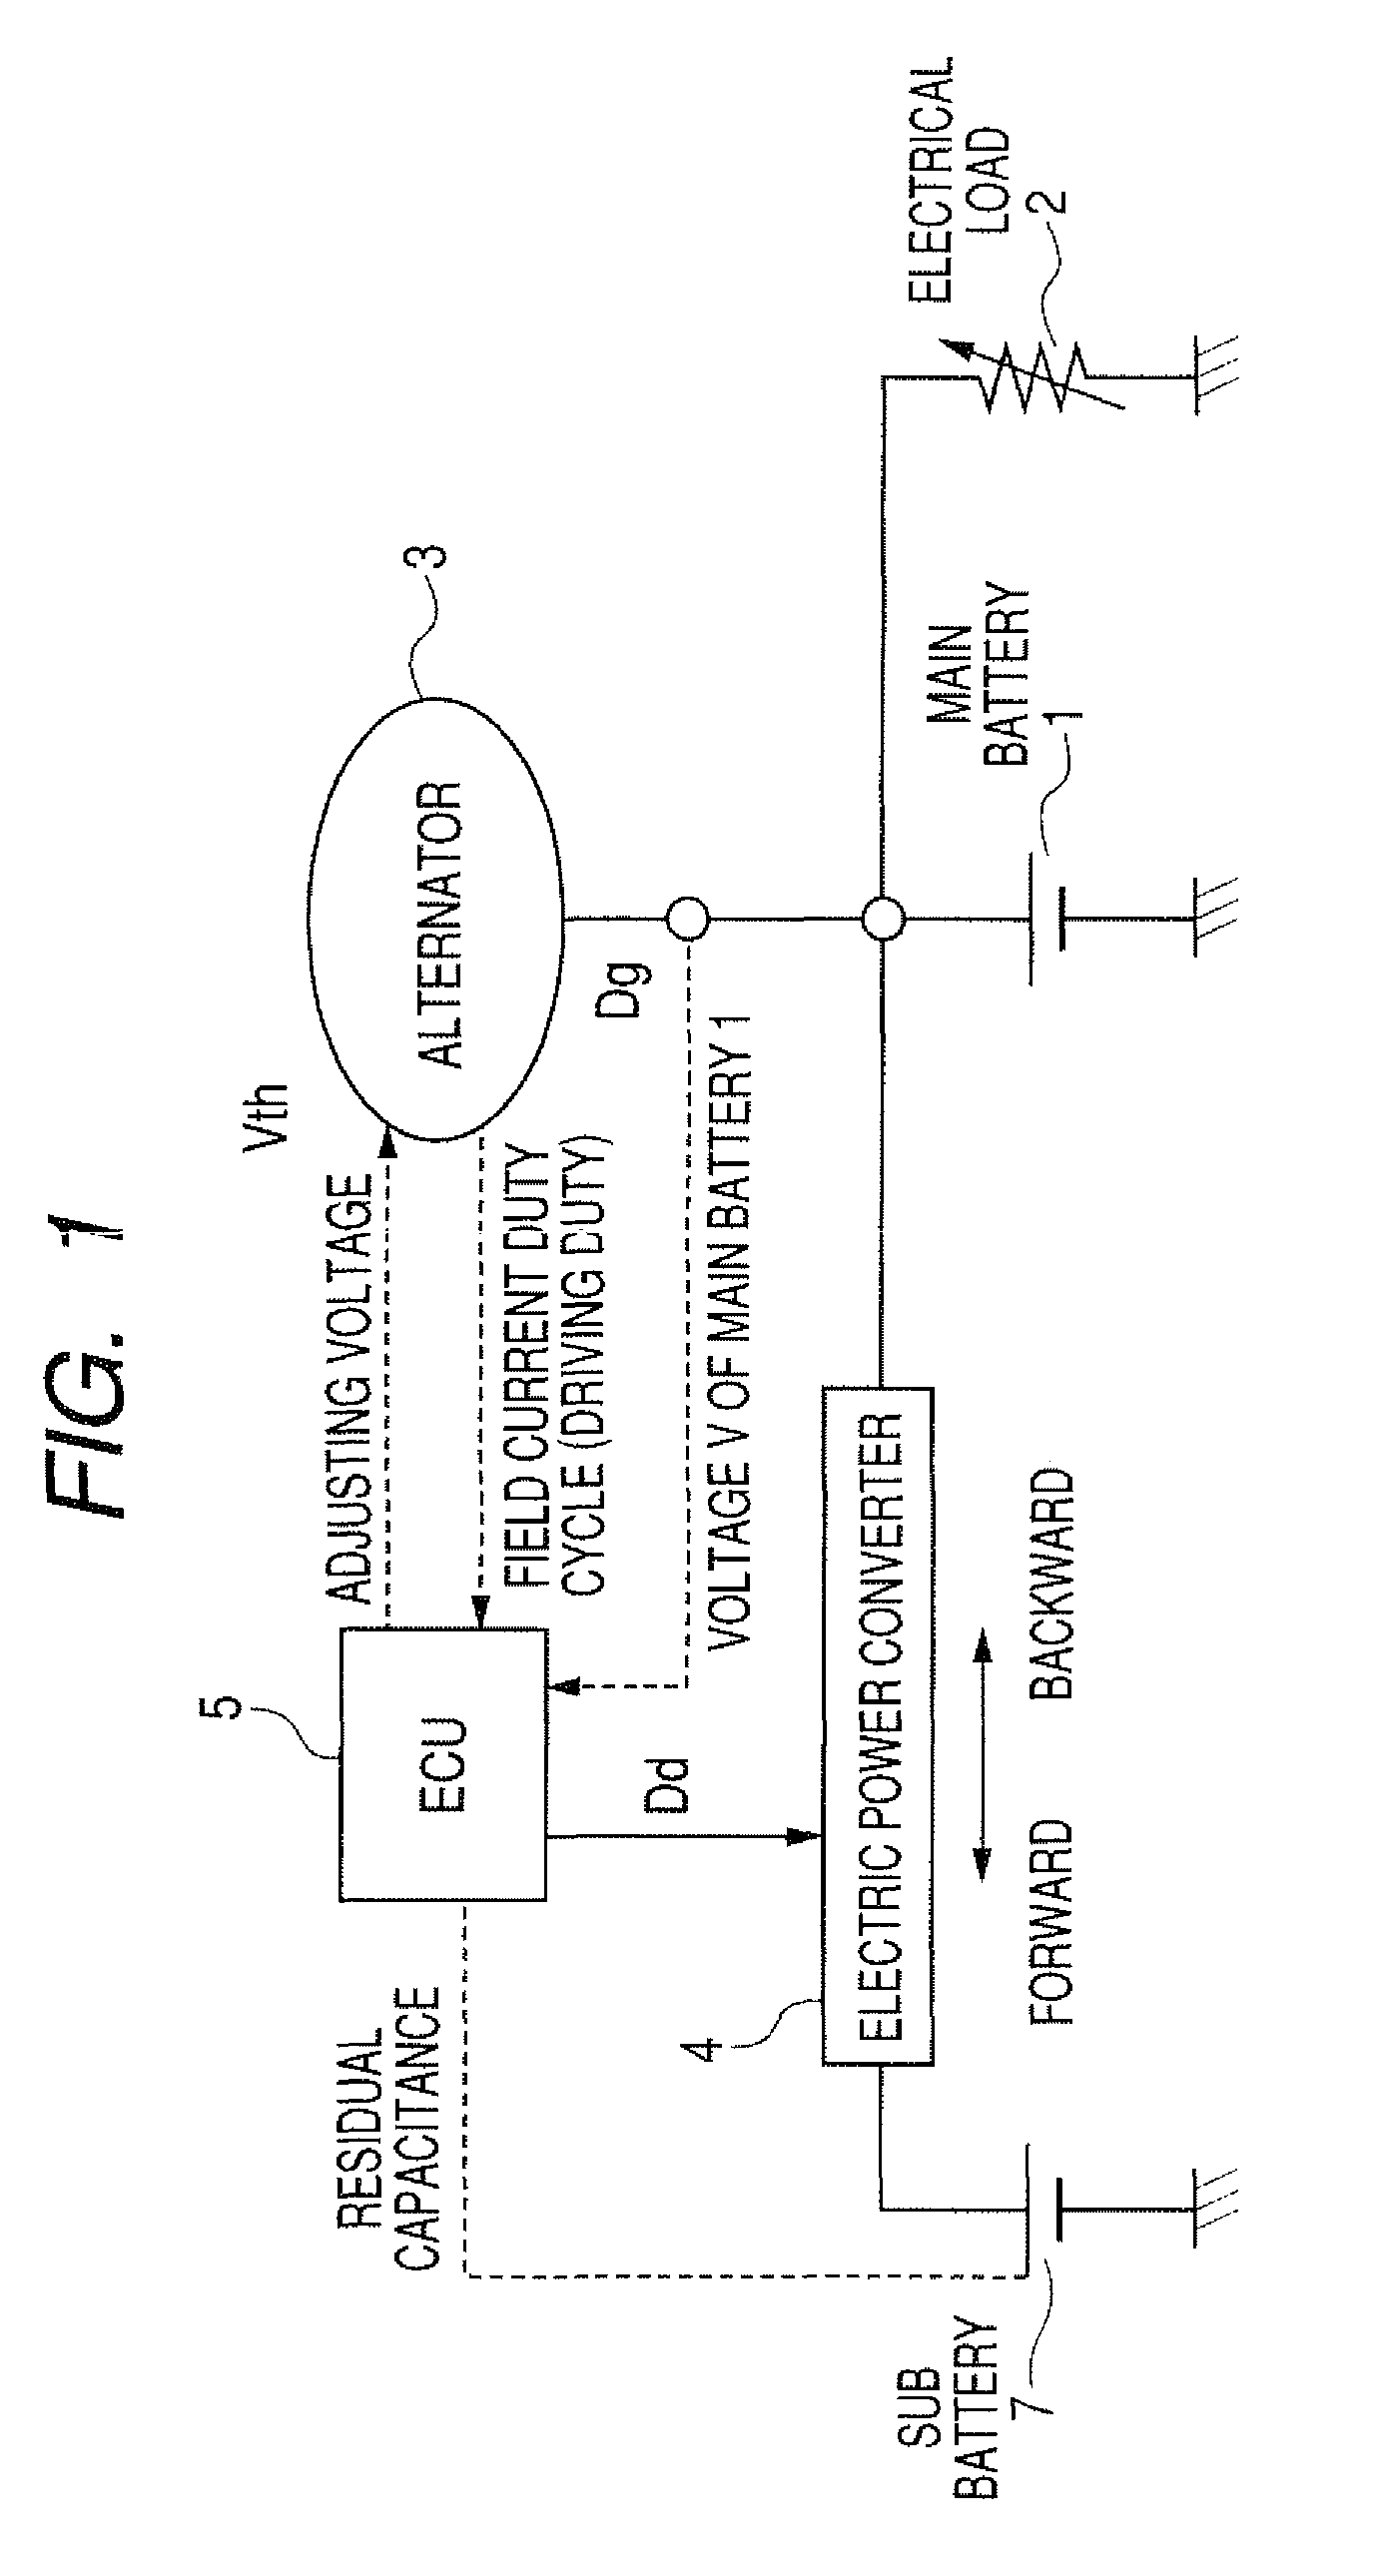 Electric power system for vehicle